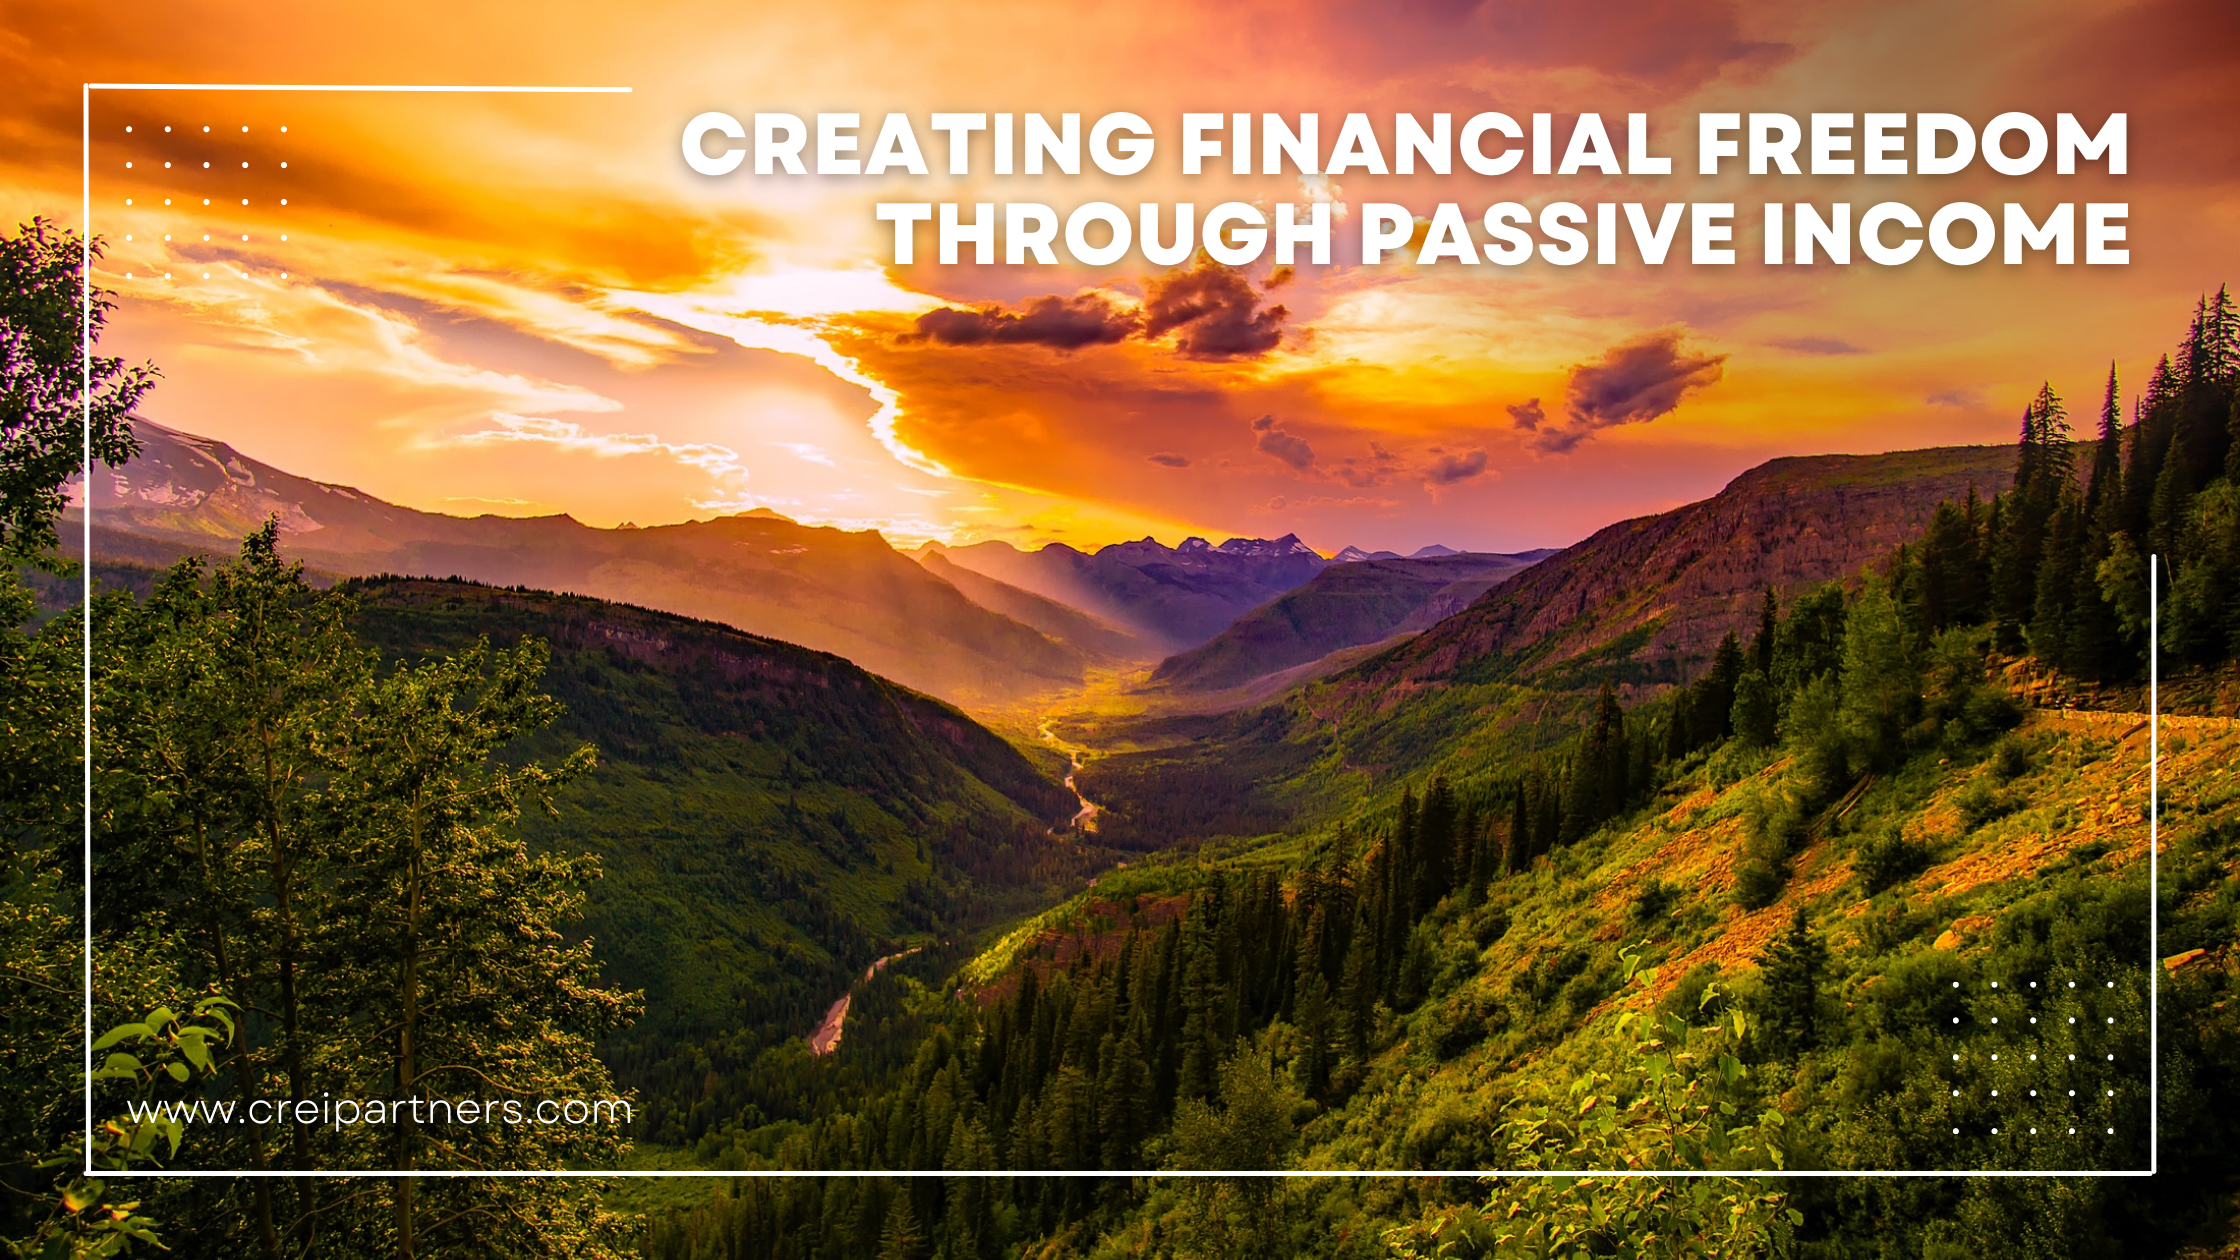 Creating financial freedom through passive income